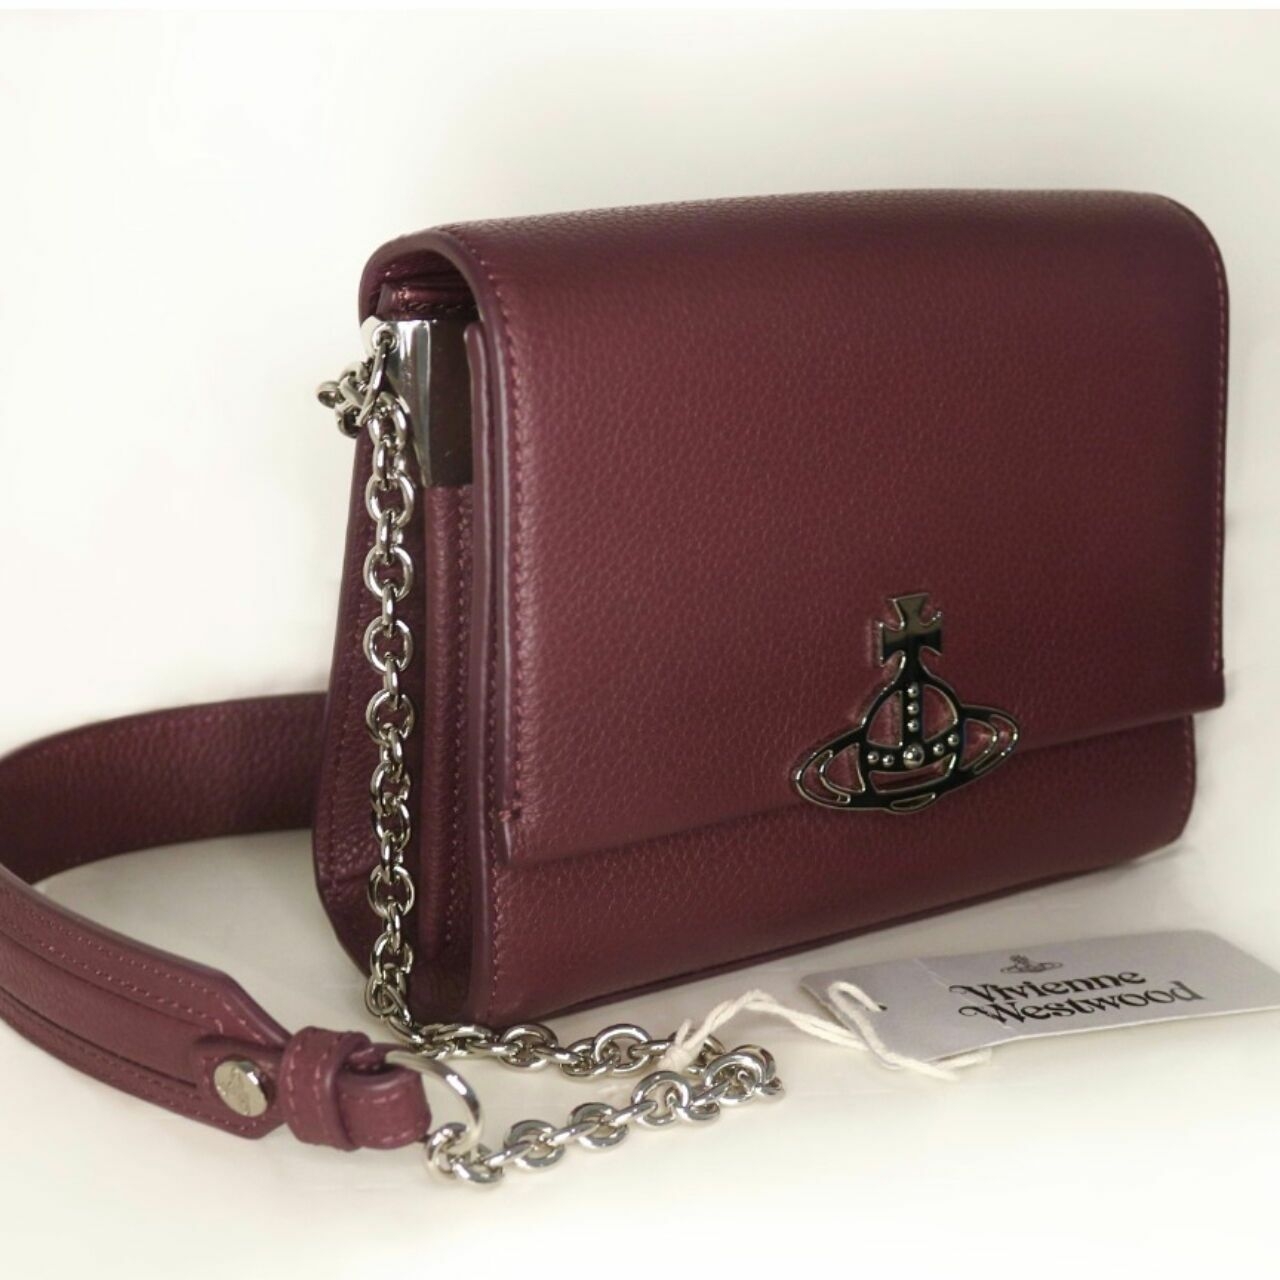 Vivienne Westwood Lucy Small Crossbody Bag